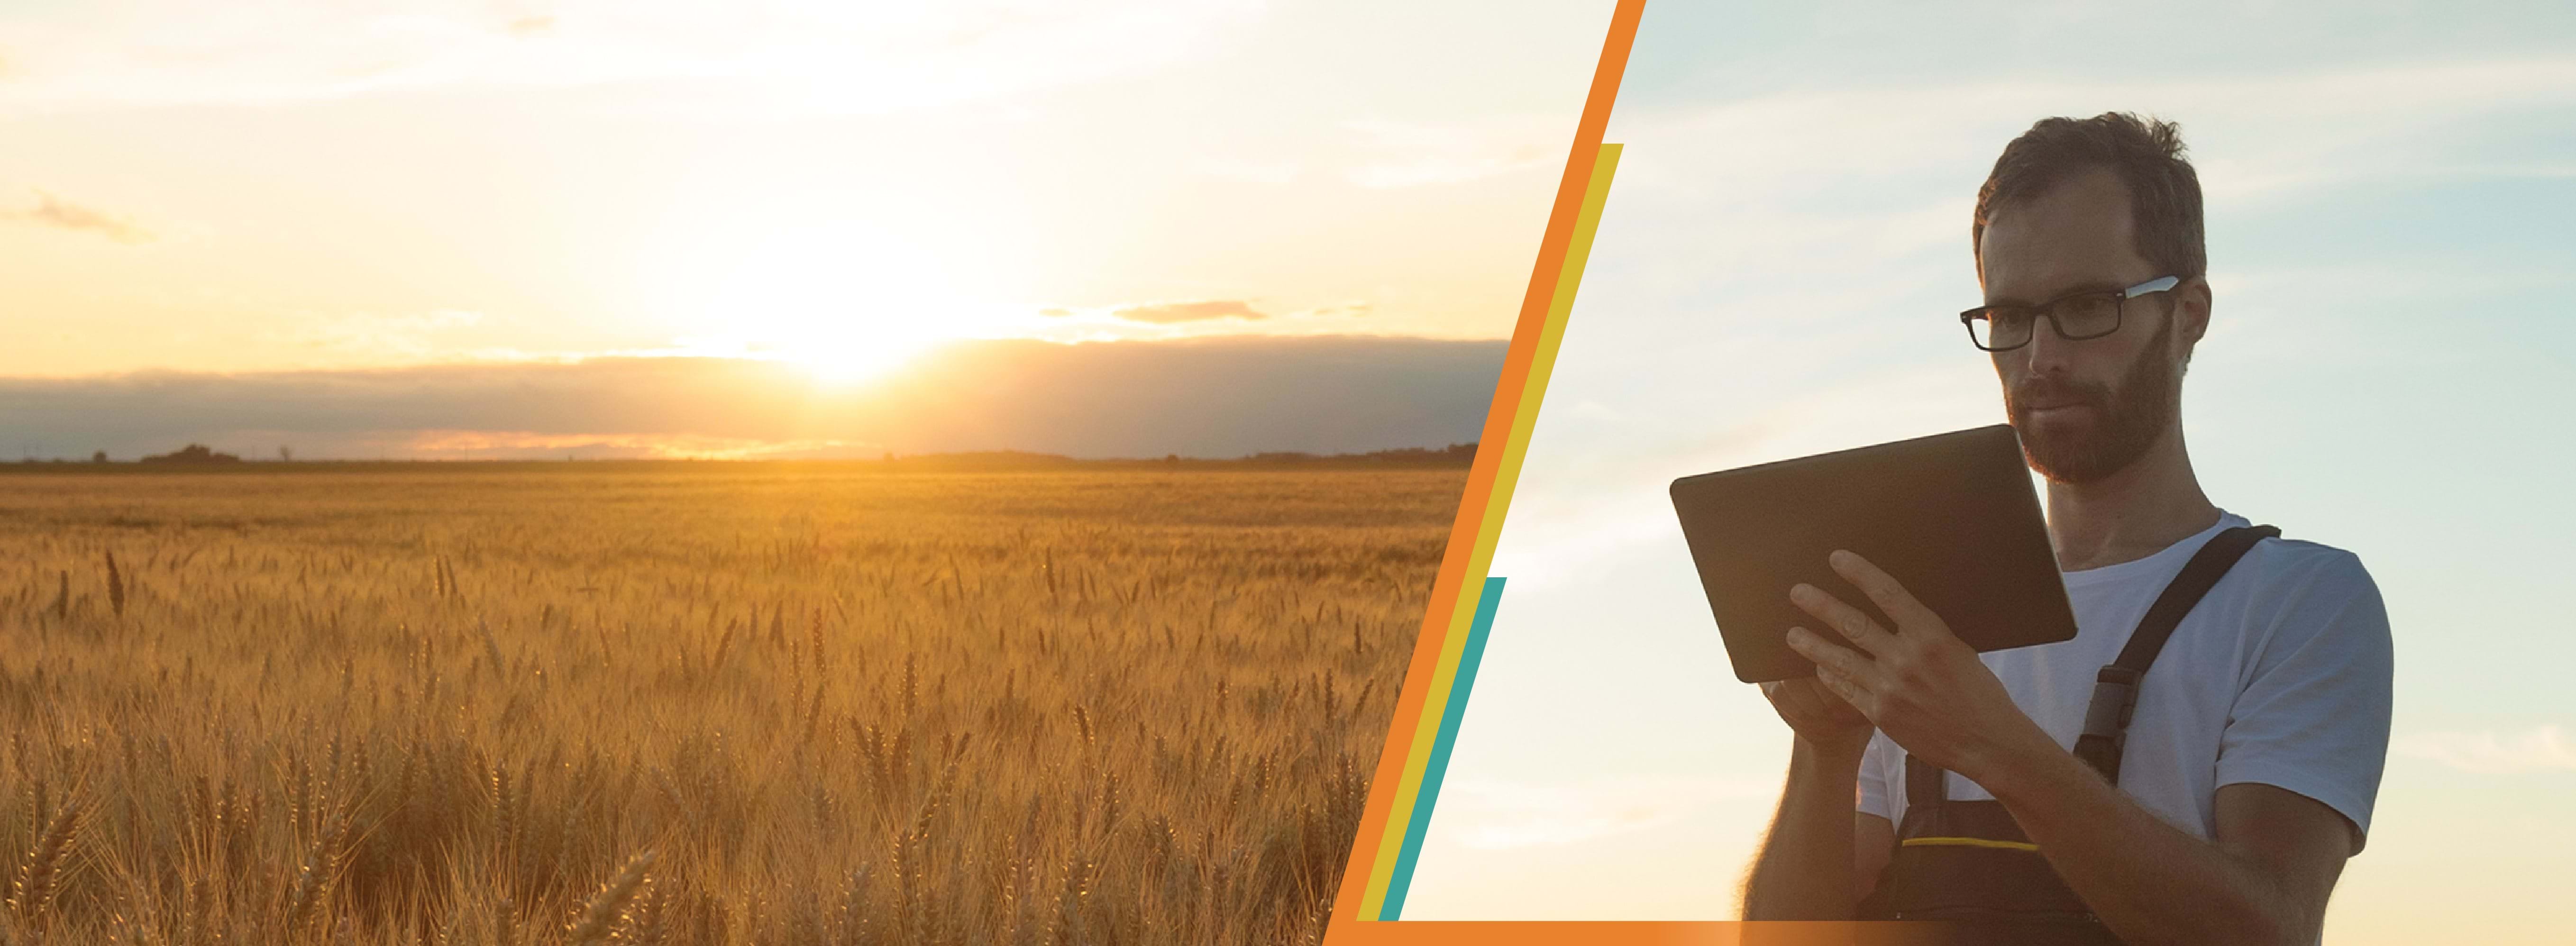 Picture of the sun setting on a vast field on the left, and on the right is a picture of a farmer using a tablet.